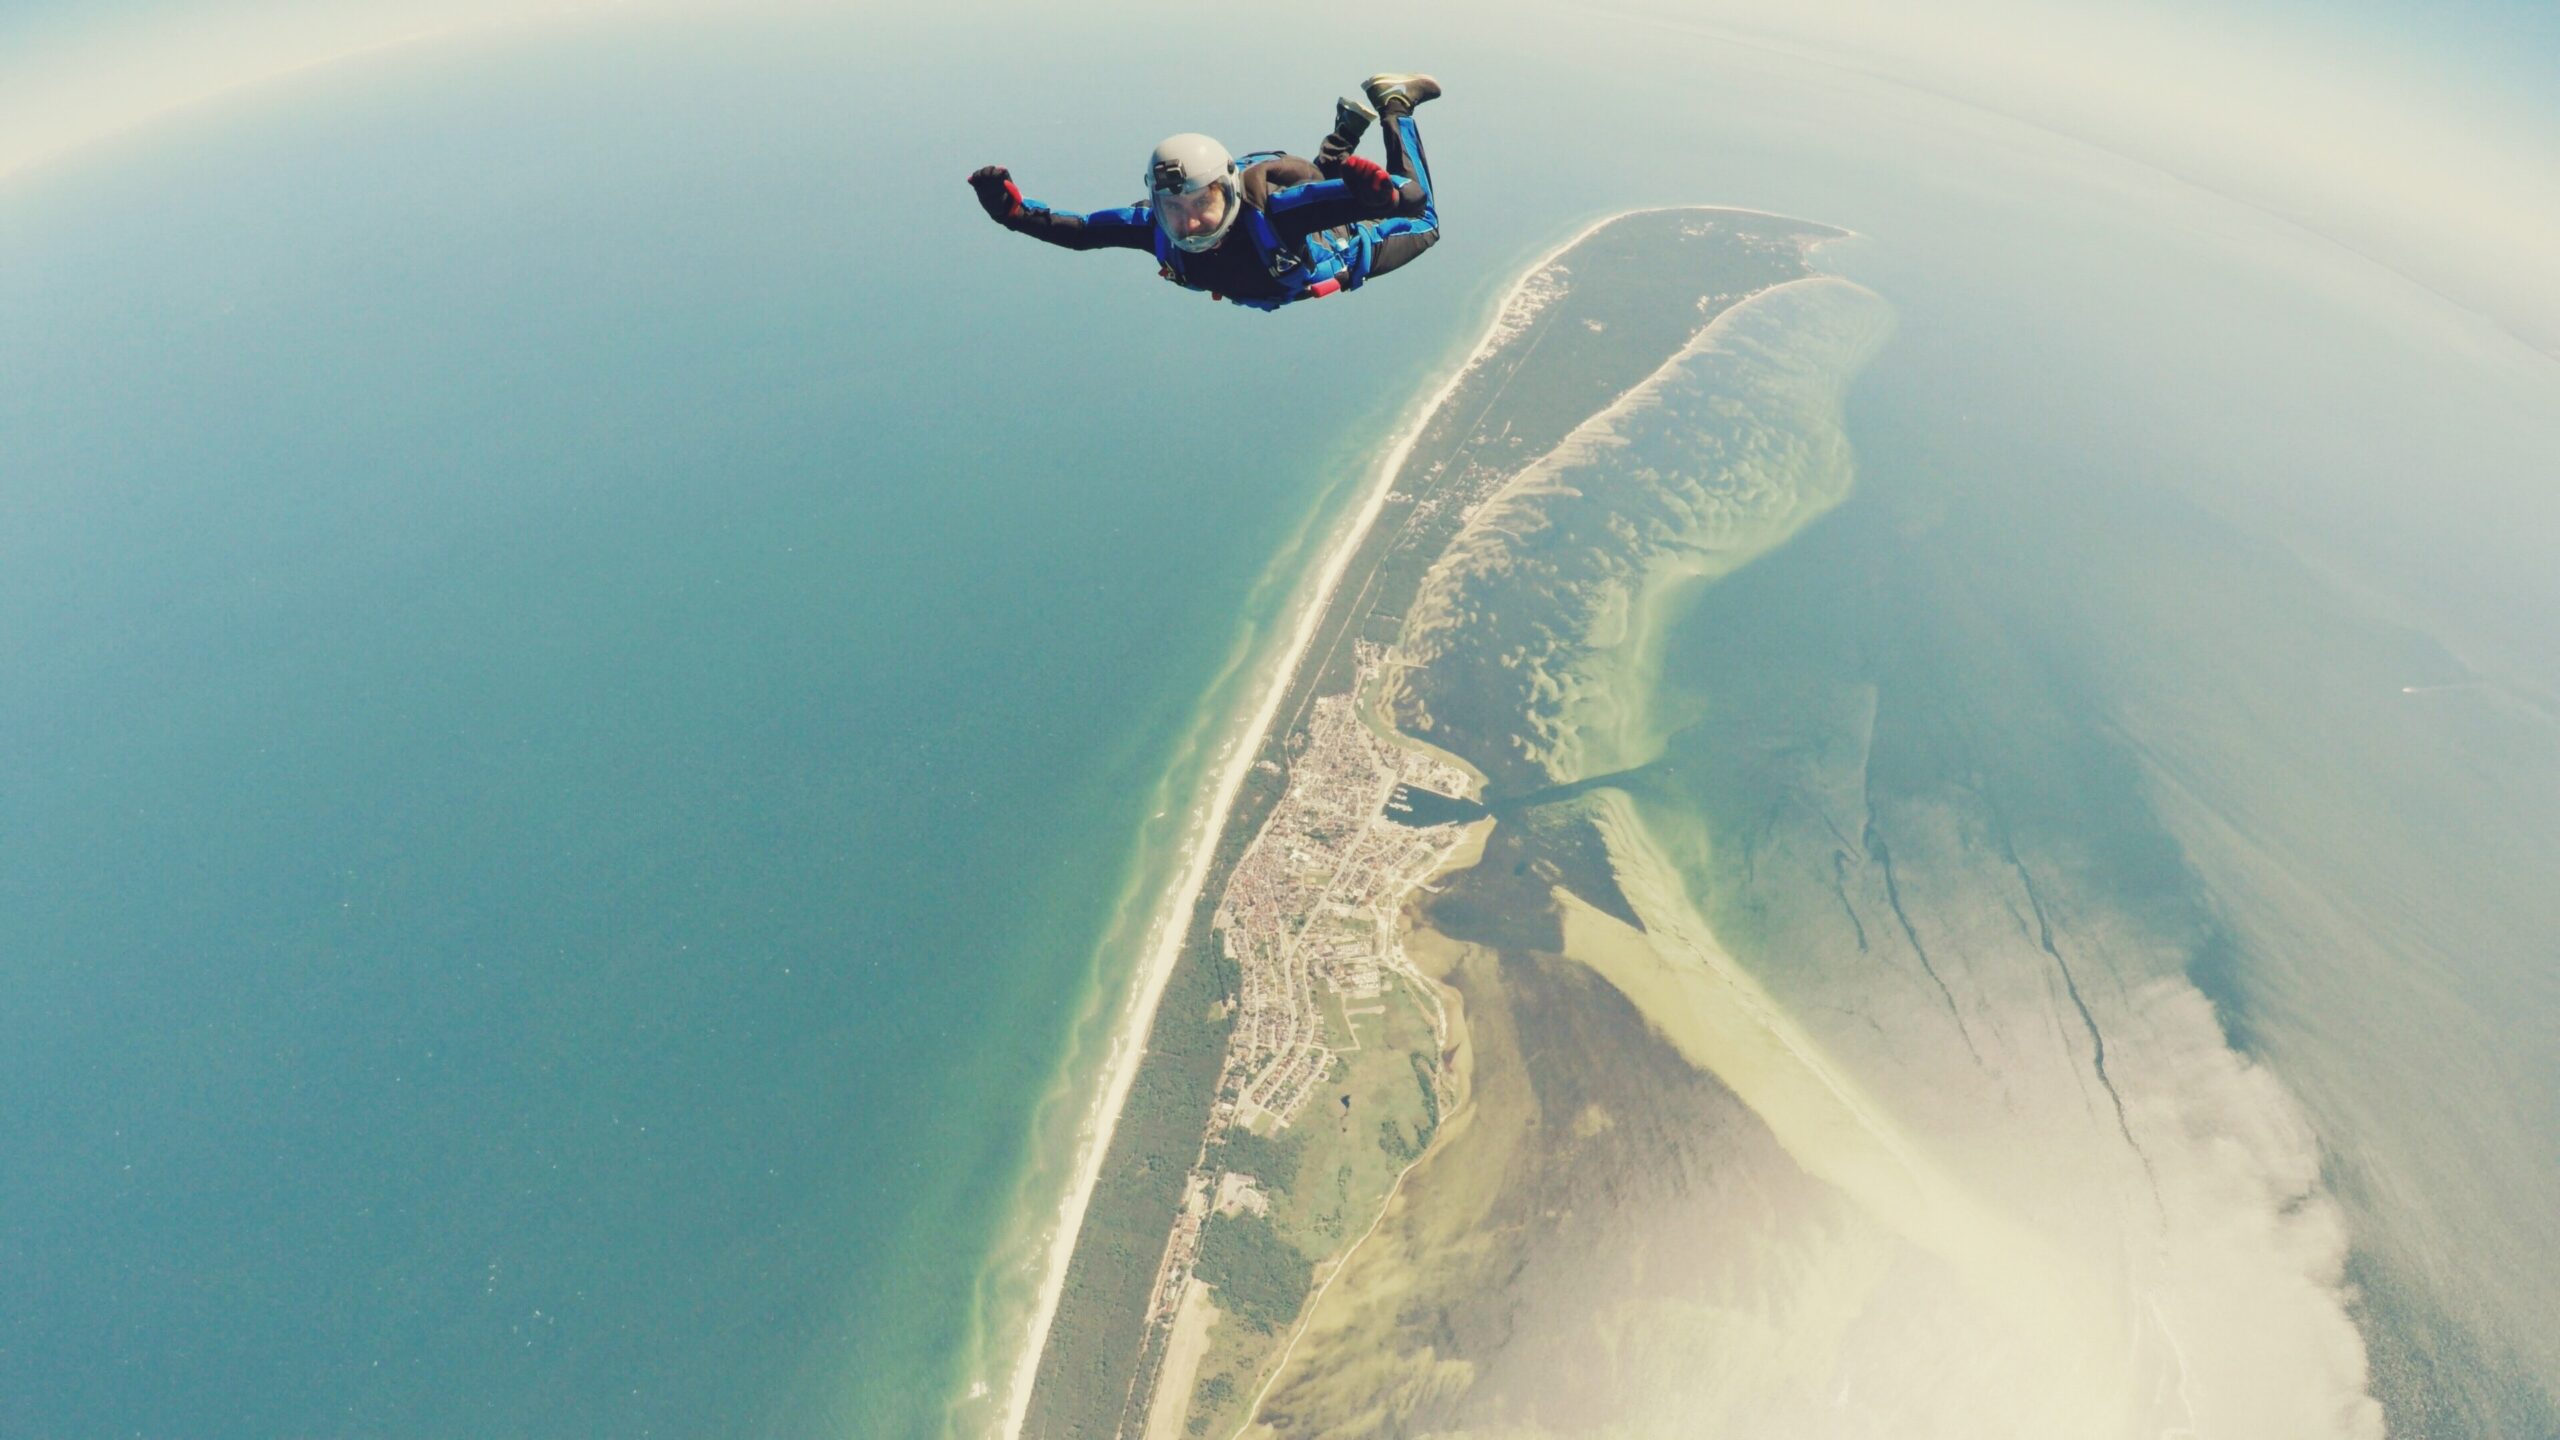 skydiving solo